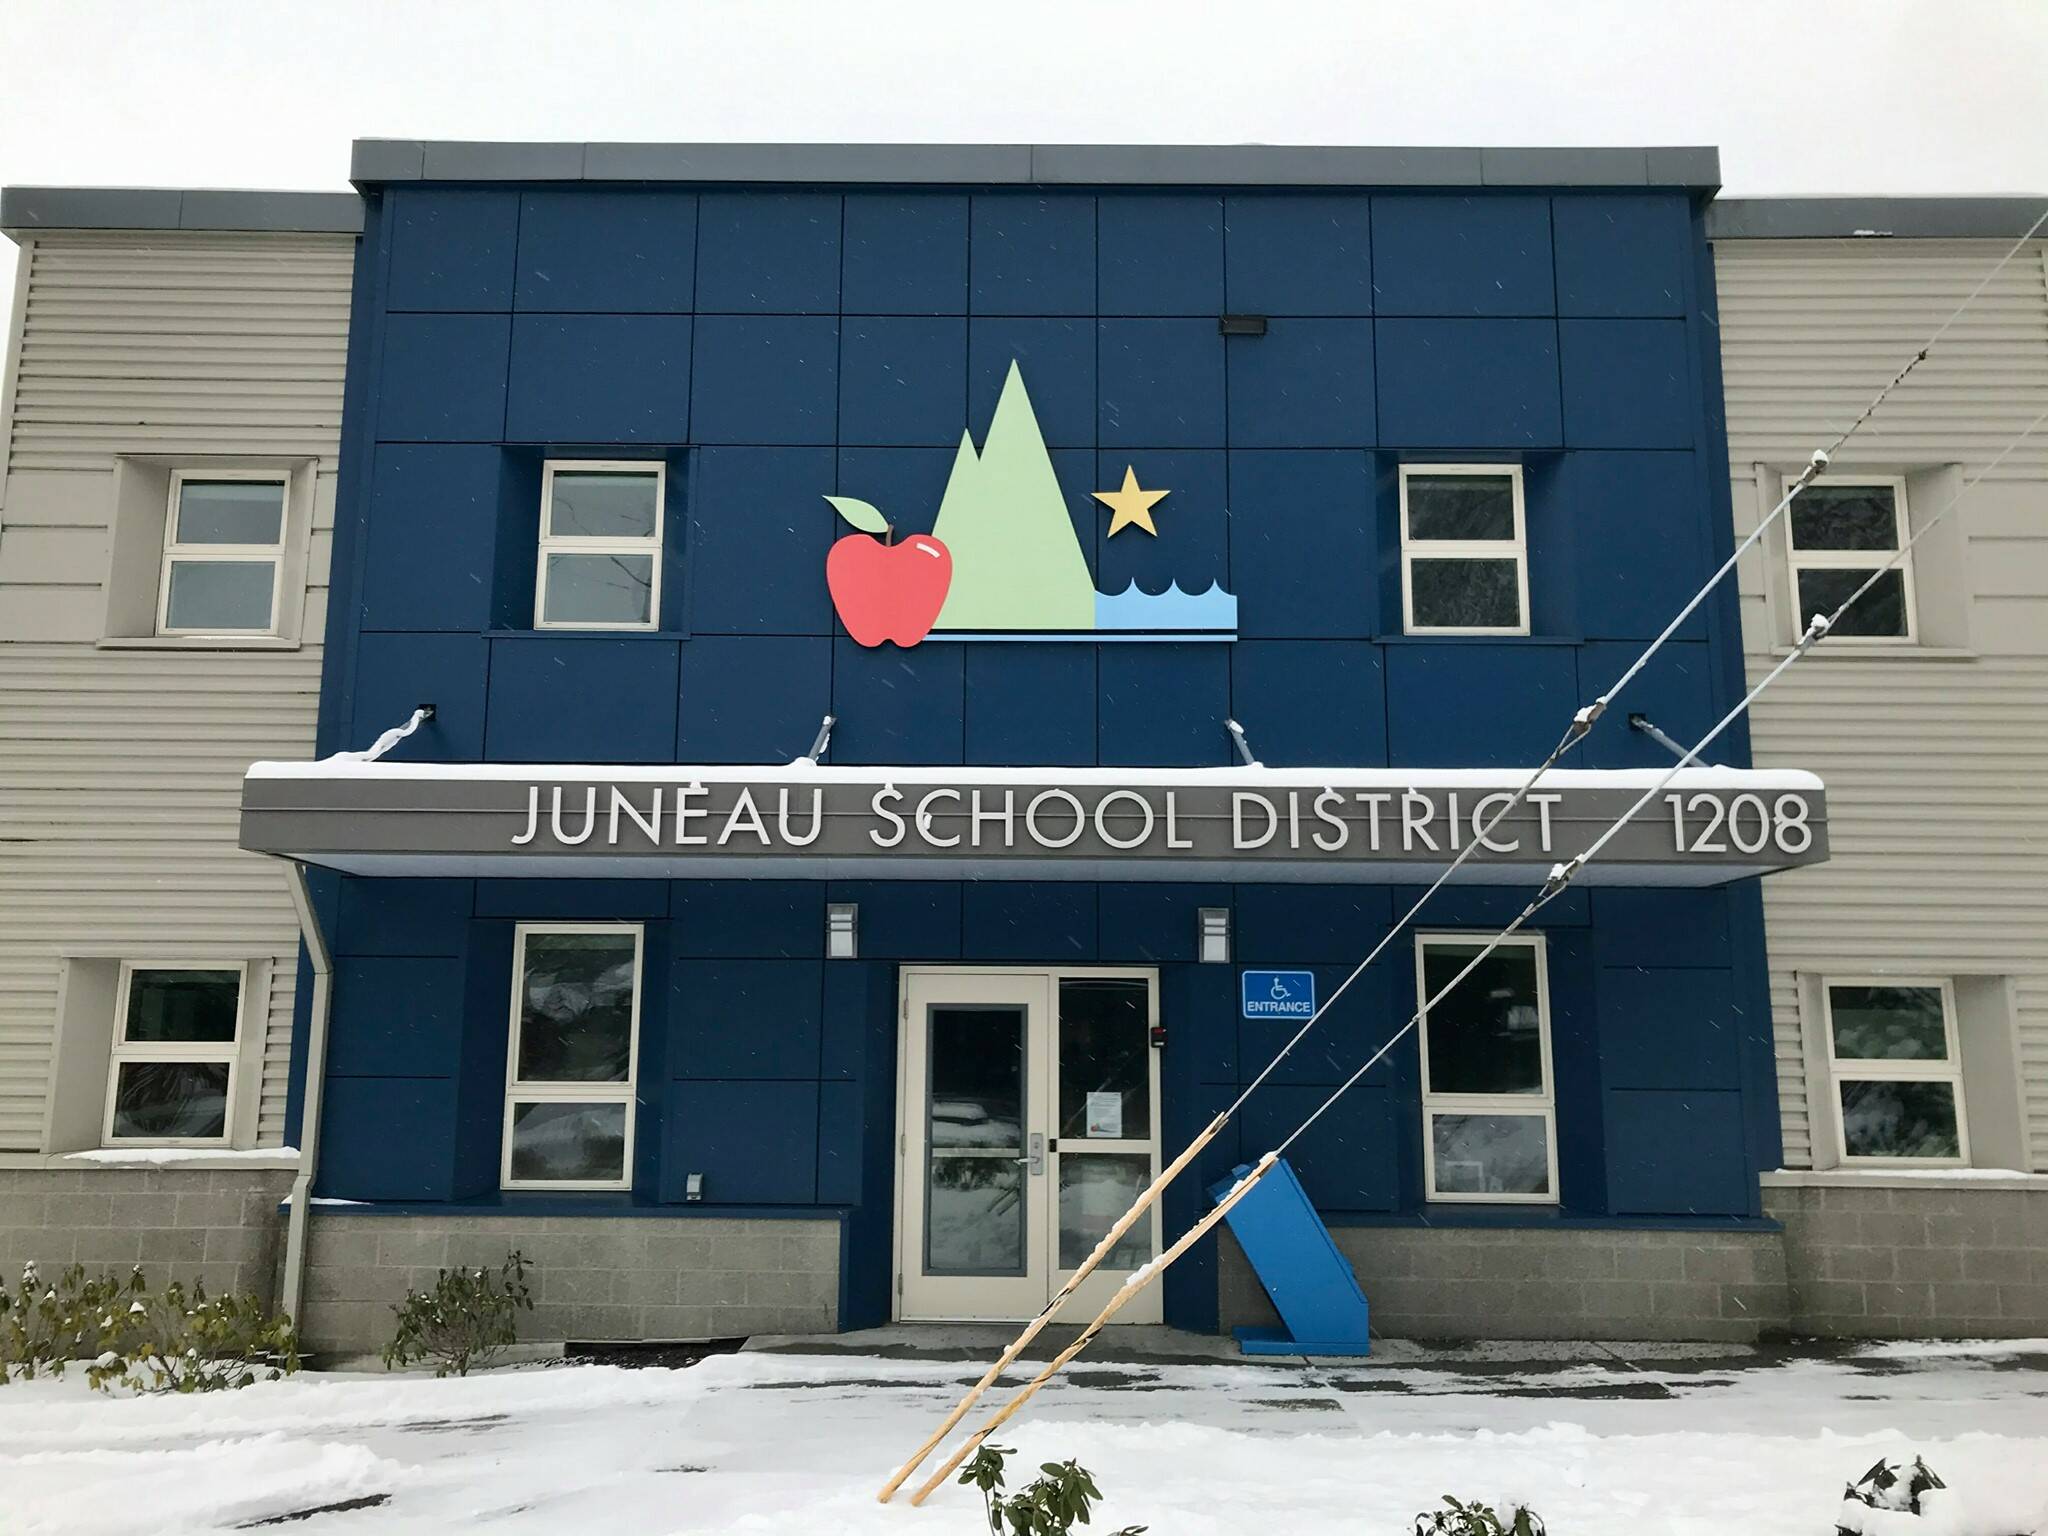 The Juneau School District is facing a current and future financial crisis, including deficit spending that has resulted in a projected $8 million shortfall for the current fiscal year, with leaders considering school consolidation among many other remedies. (City and Borough of Juneau photo)